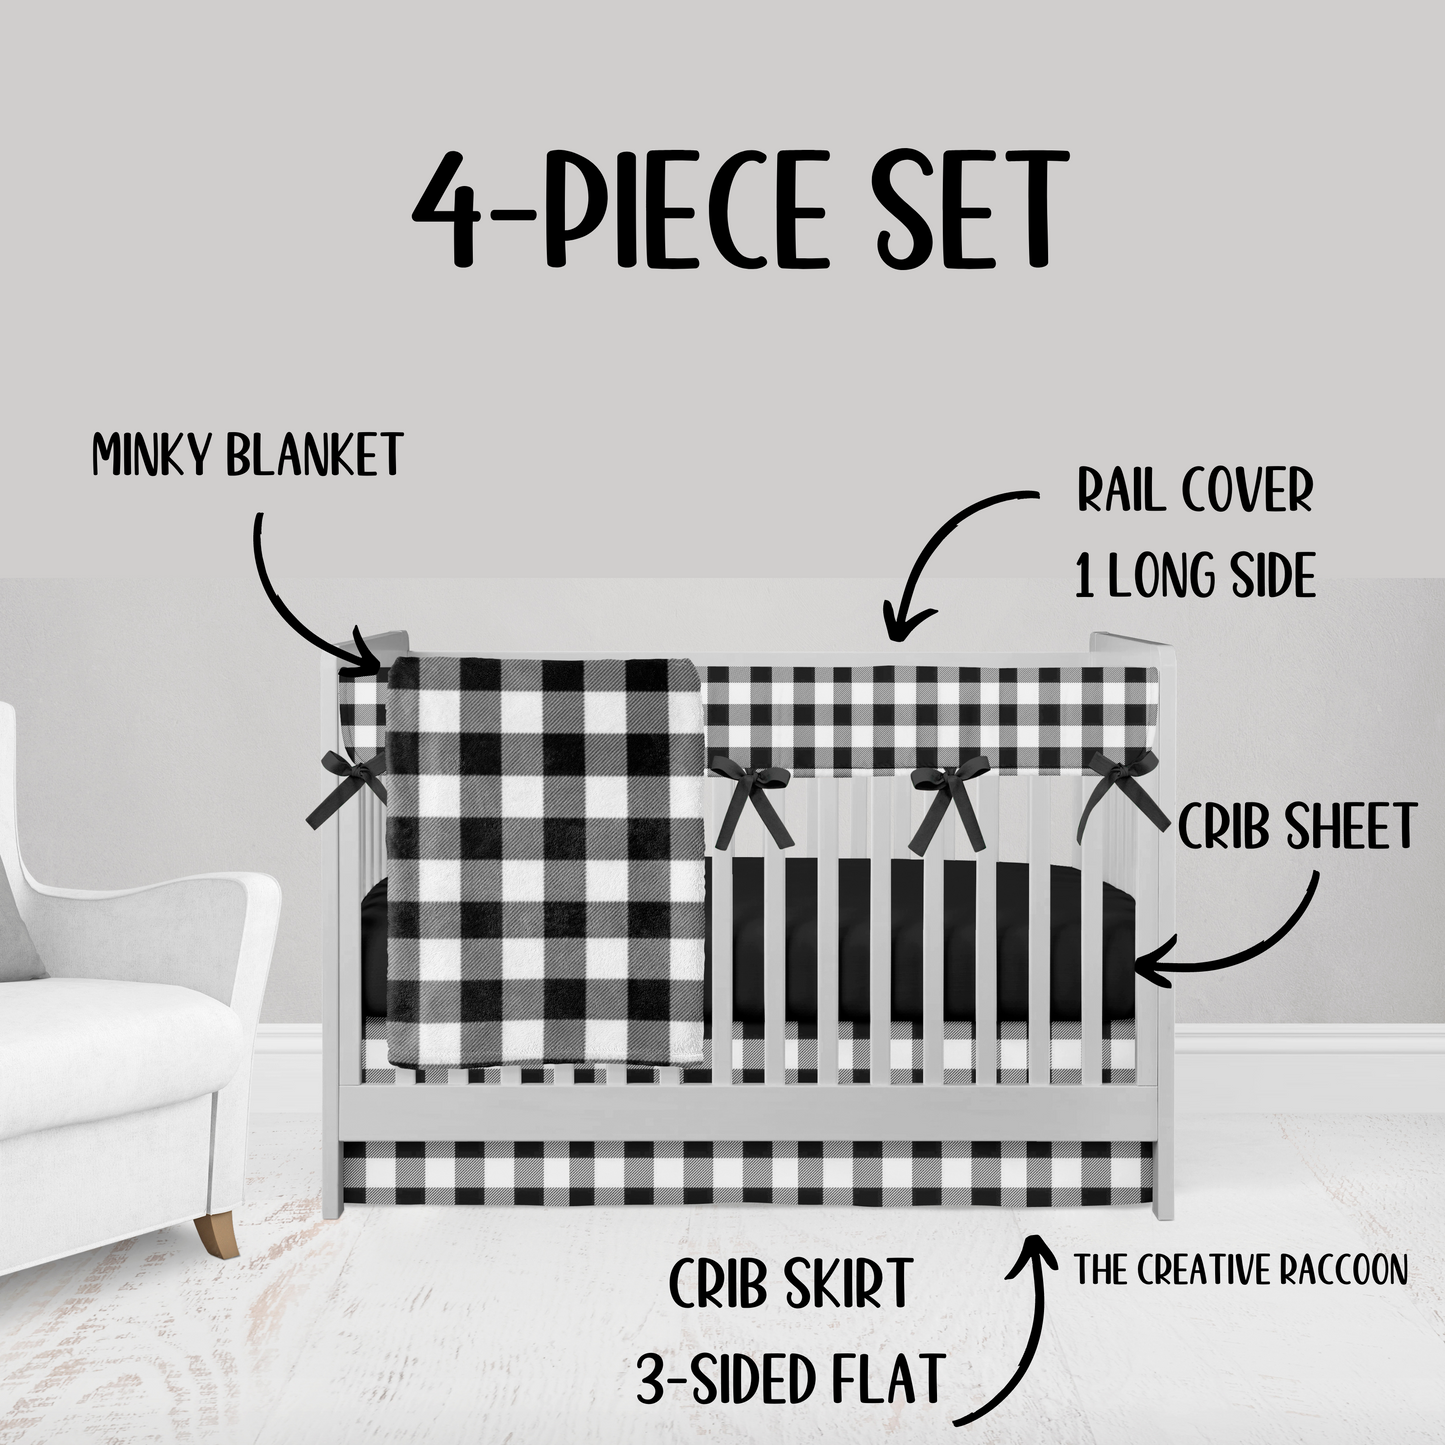 4-piece set - black gingham cotton or minky blanket, rail cover 1 long side with black ties, black crib sheet & 3-sided flat crib skirt. all gingham check will be the same size.